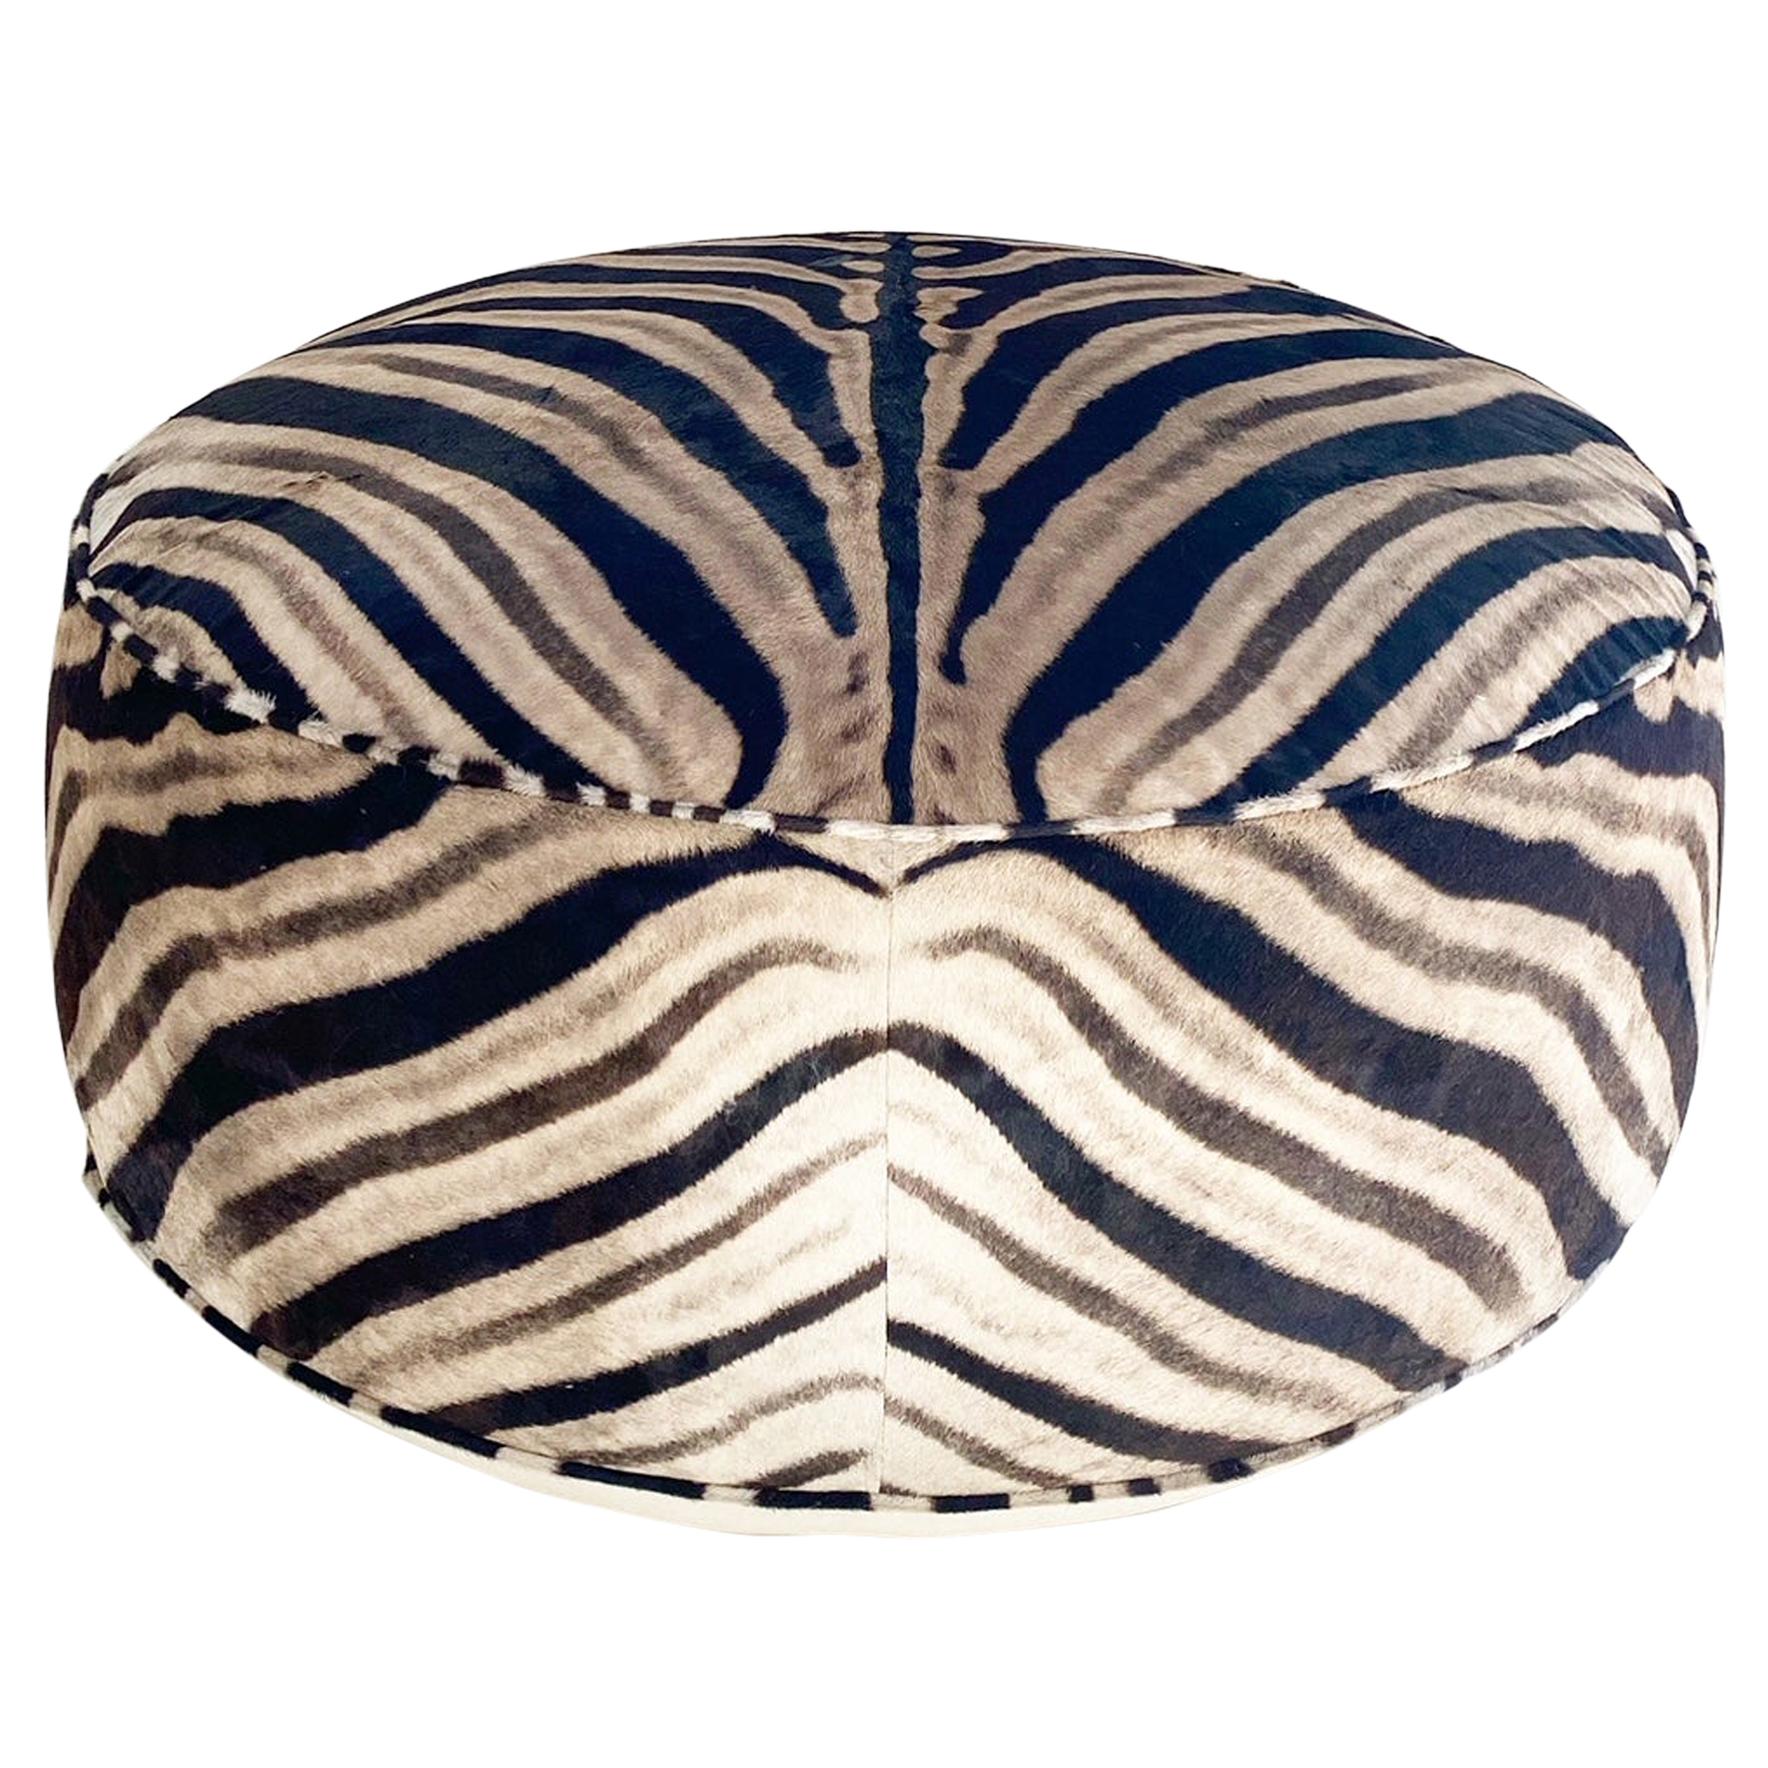 The Forsyth Cloud Ottoman in Zebra Hide For Sale